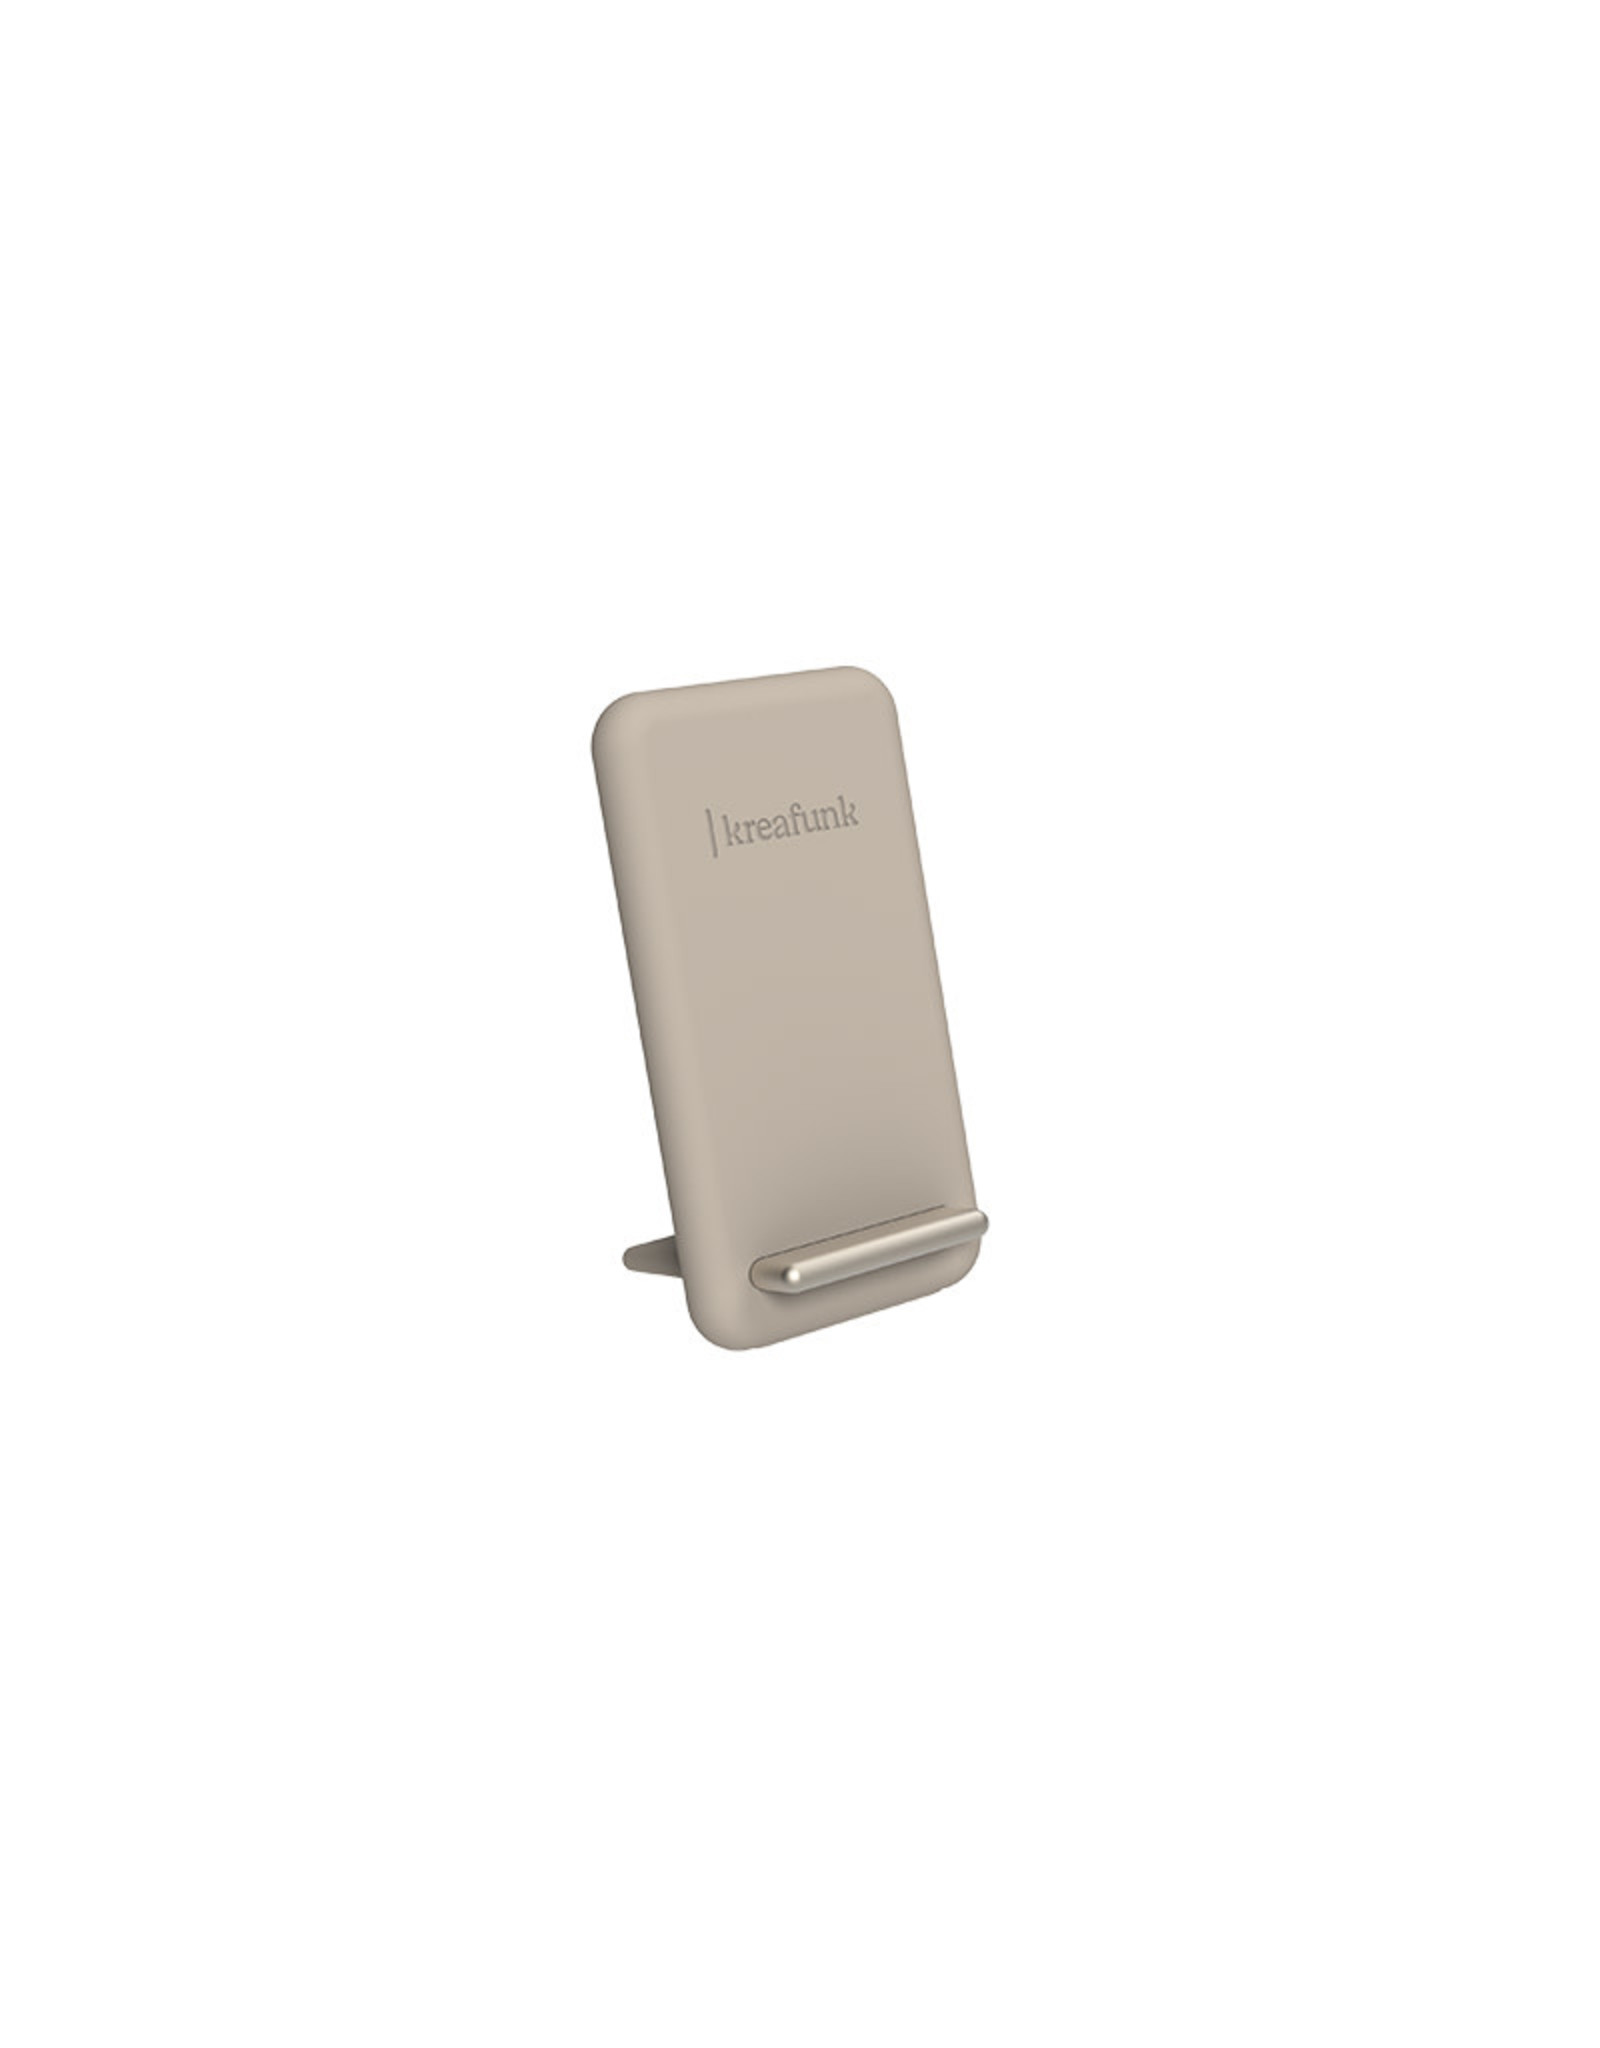 Kreafunk reCharge Wireless Charger - Ivory Sand